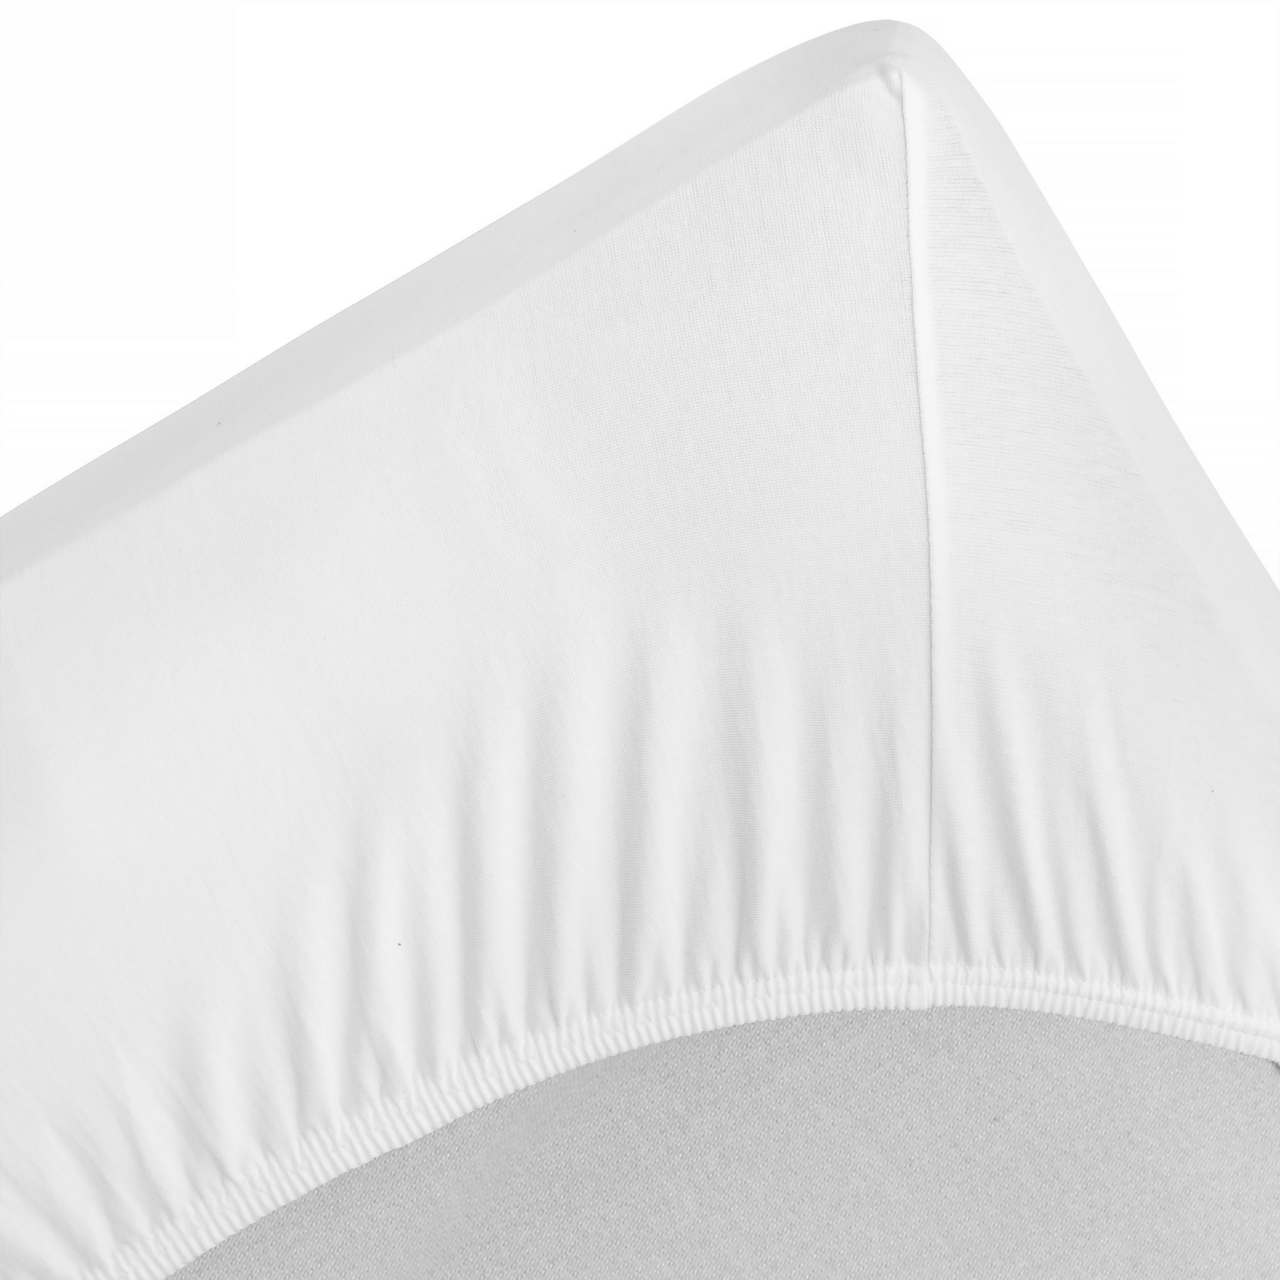 Mattress cover, fitted sheet 90x200 cm, White